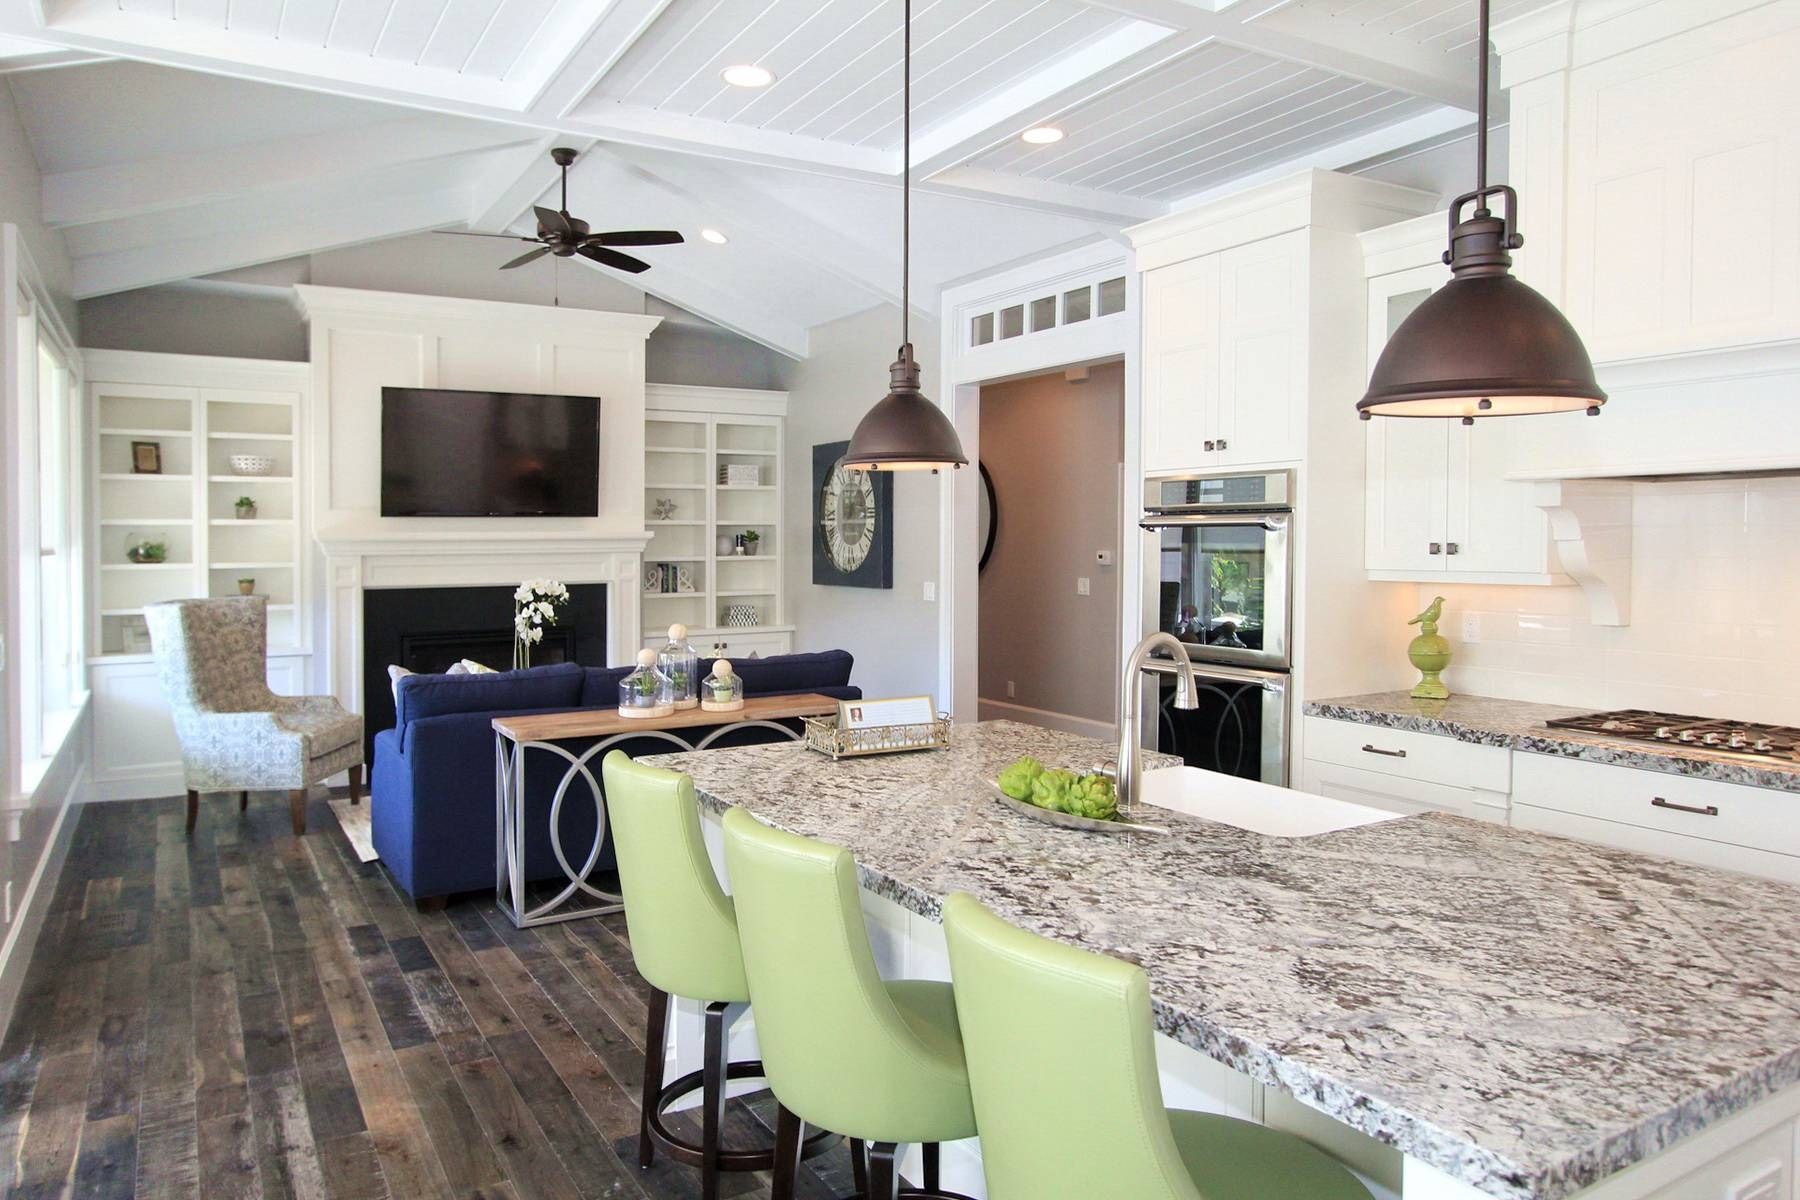 Lighting Options Over The Kitchen Island Regarding Pendants For Kitchen Island (View 7 of 15)